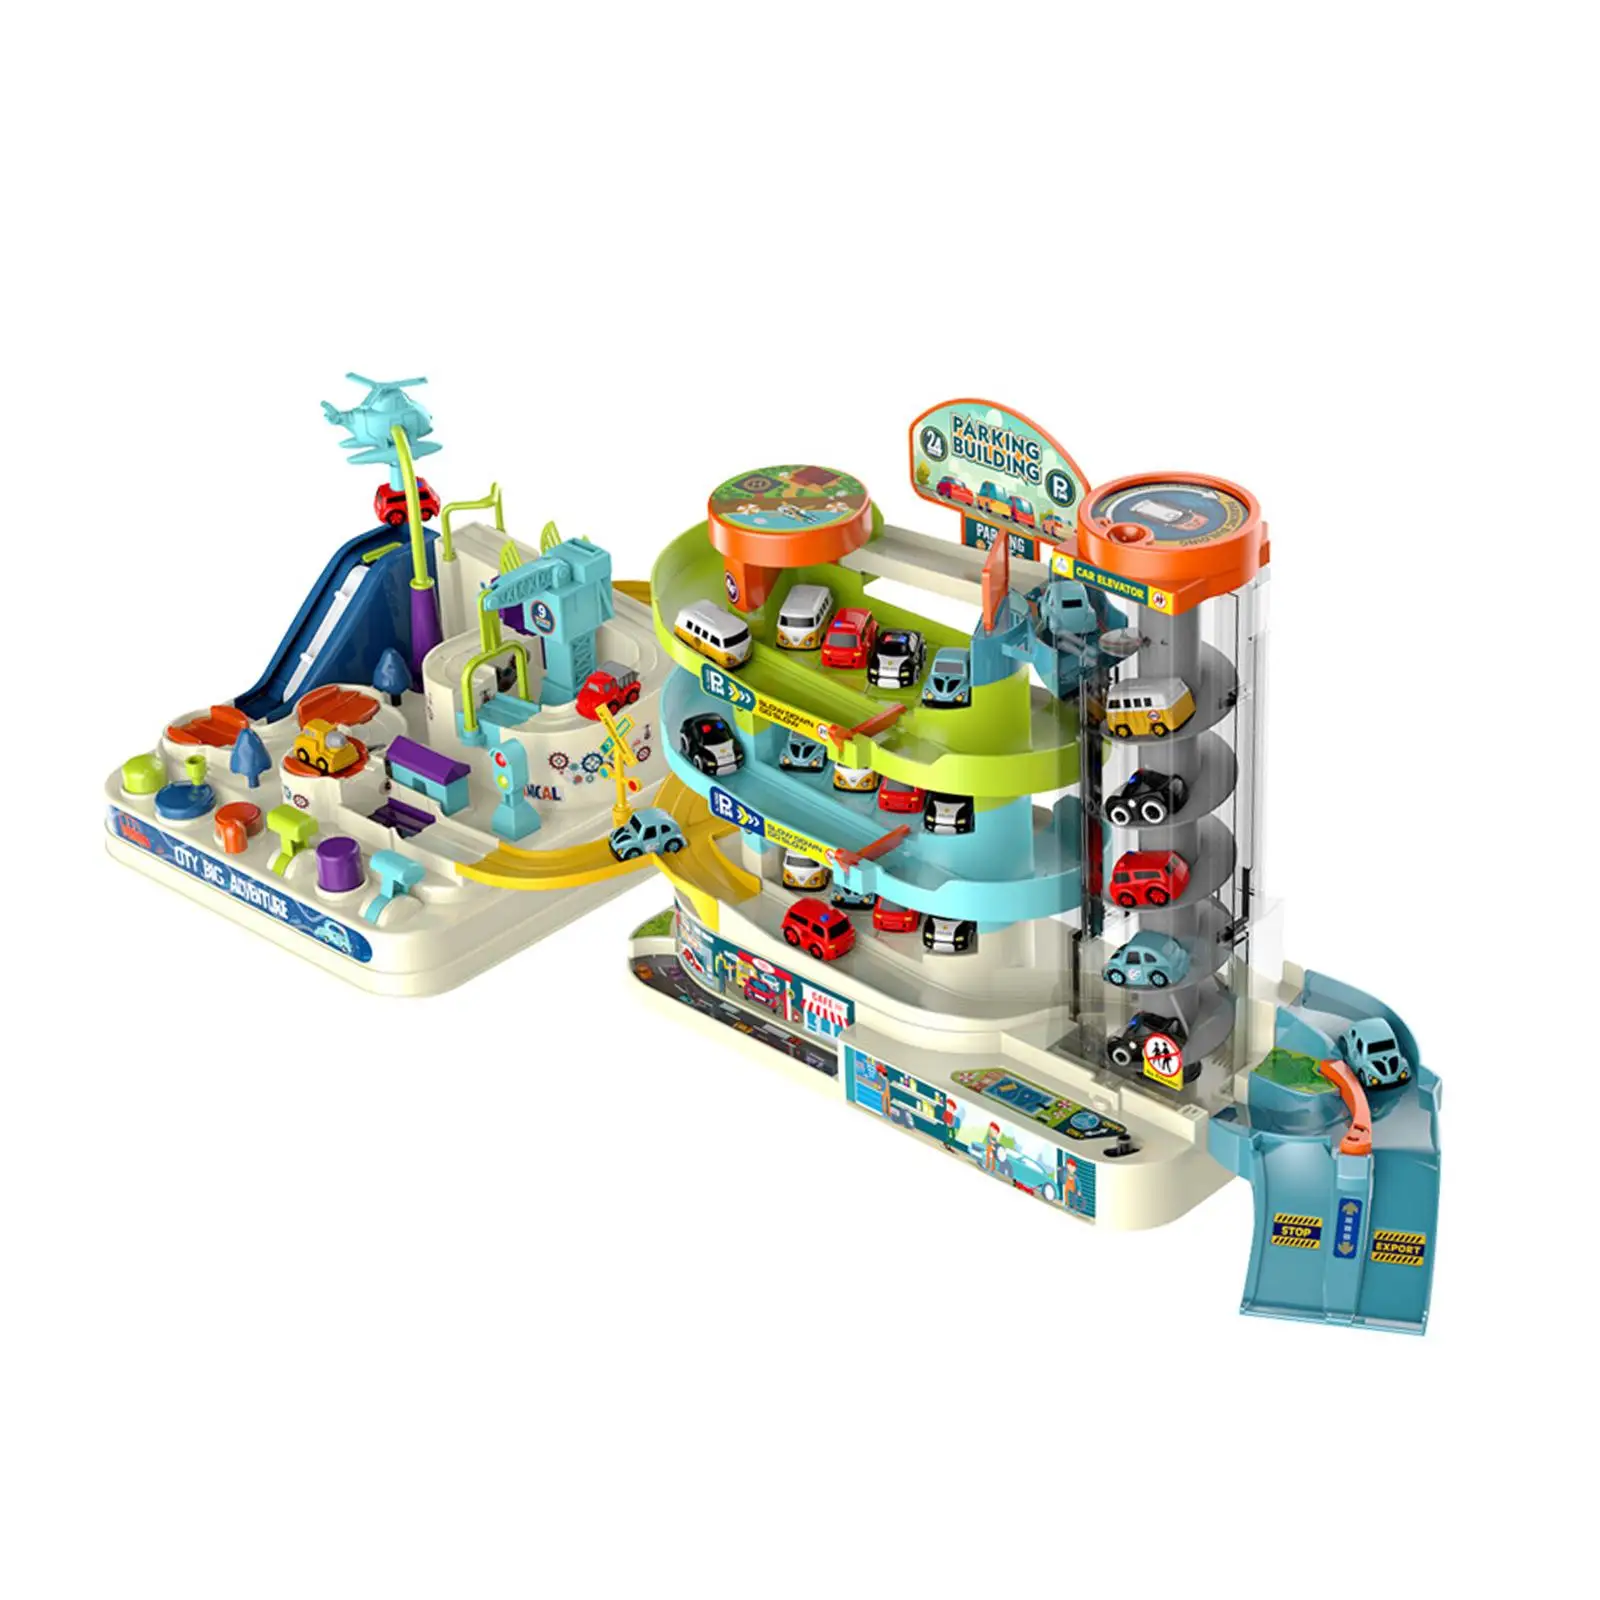 City Car Parking Toy Set with Electric Elevator 3 Level Race Car Toy